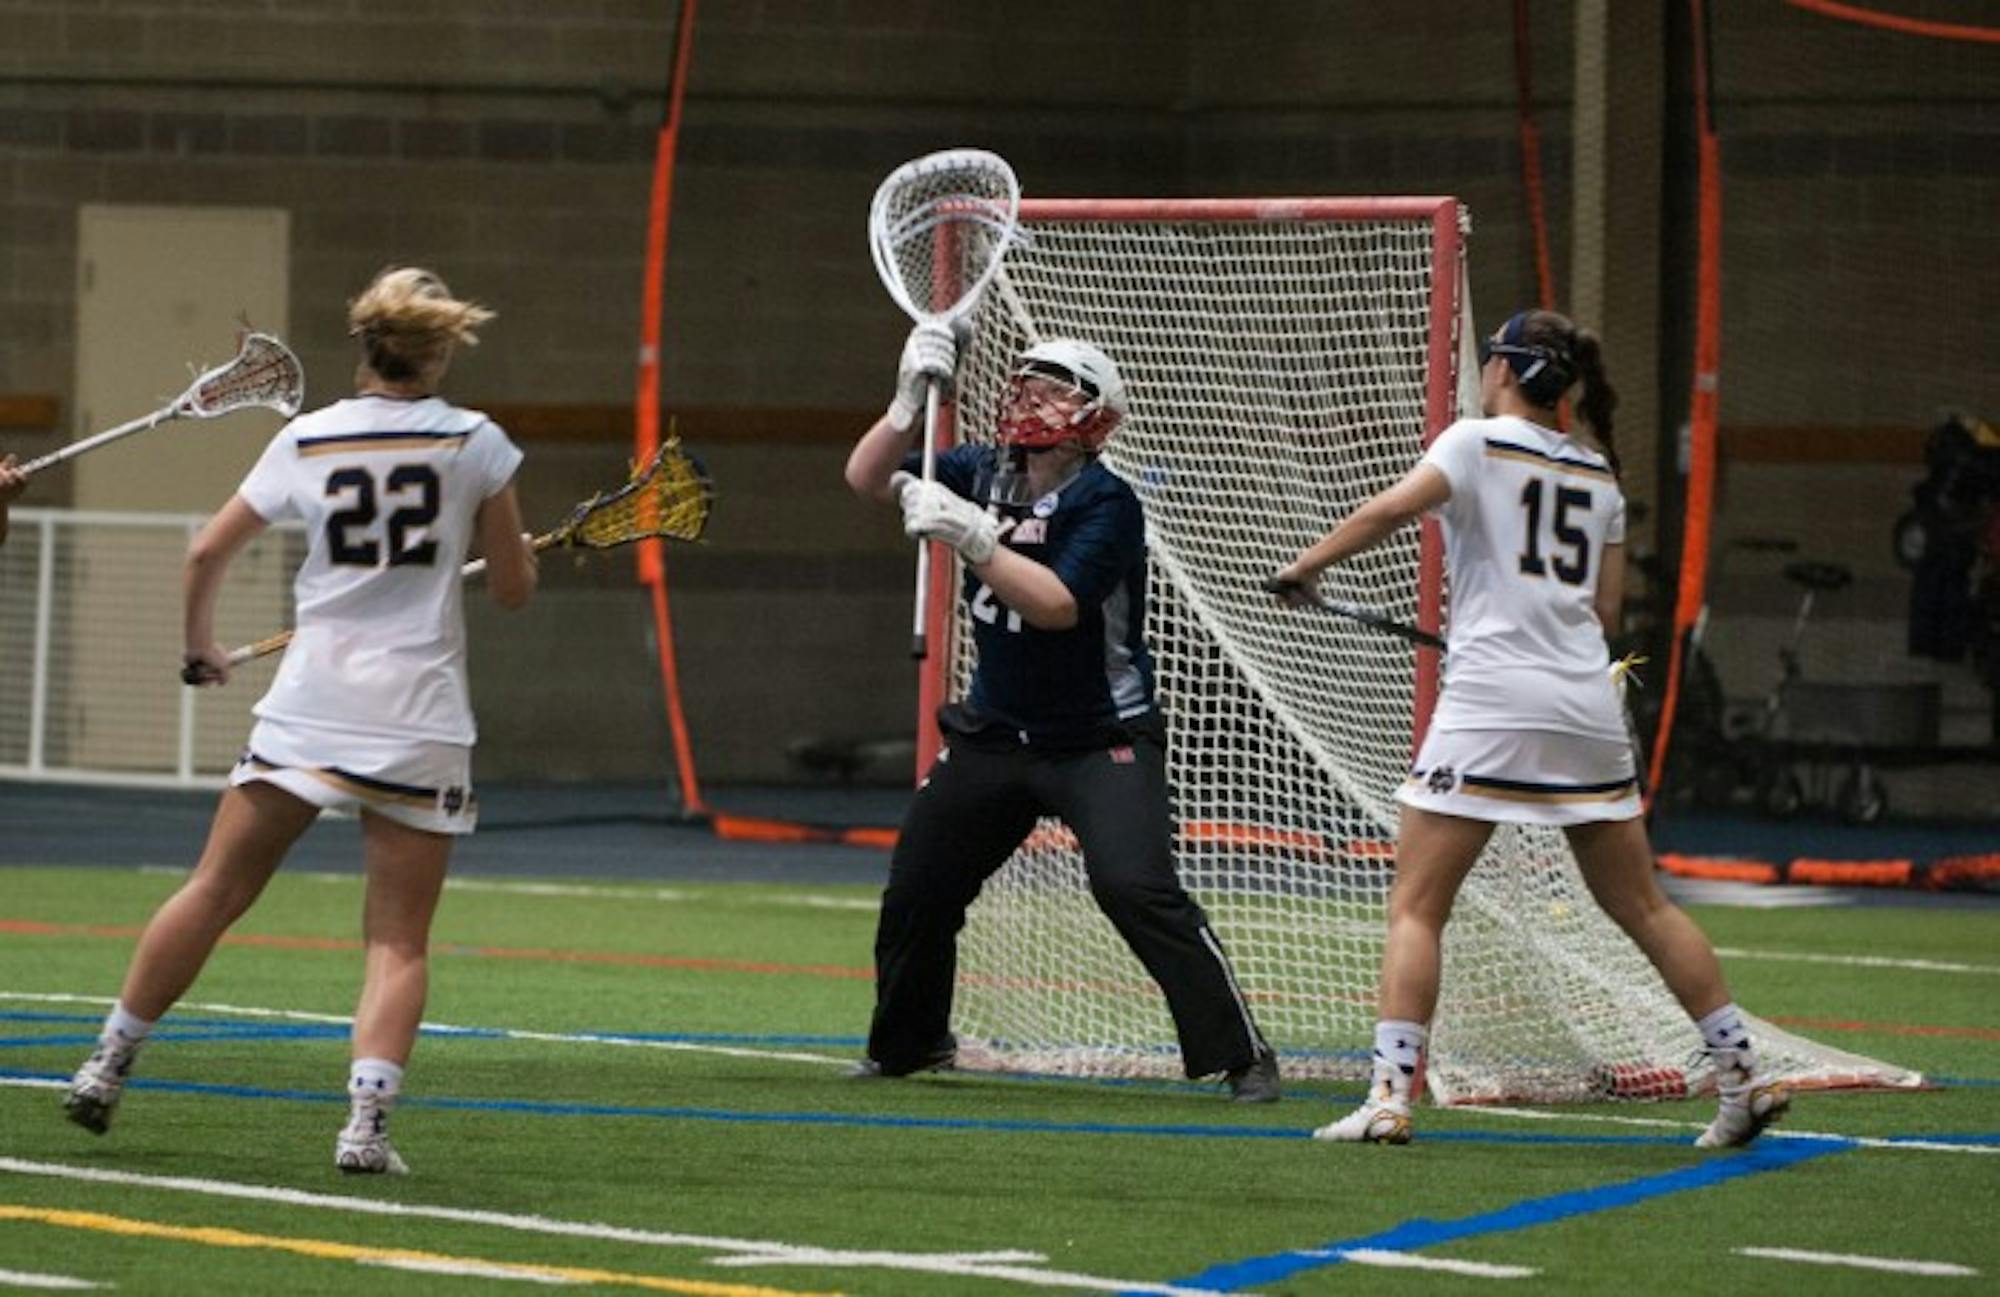 Irish senior attack Cortney Fortunato pressures the goalkeeper during Notre Dame's 24-9 victory over Detriot Mercy on Saturday at Loftus Sports Complex.